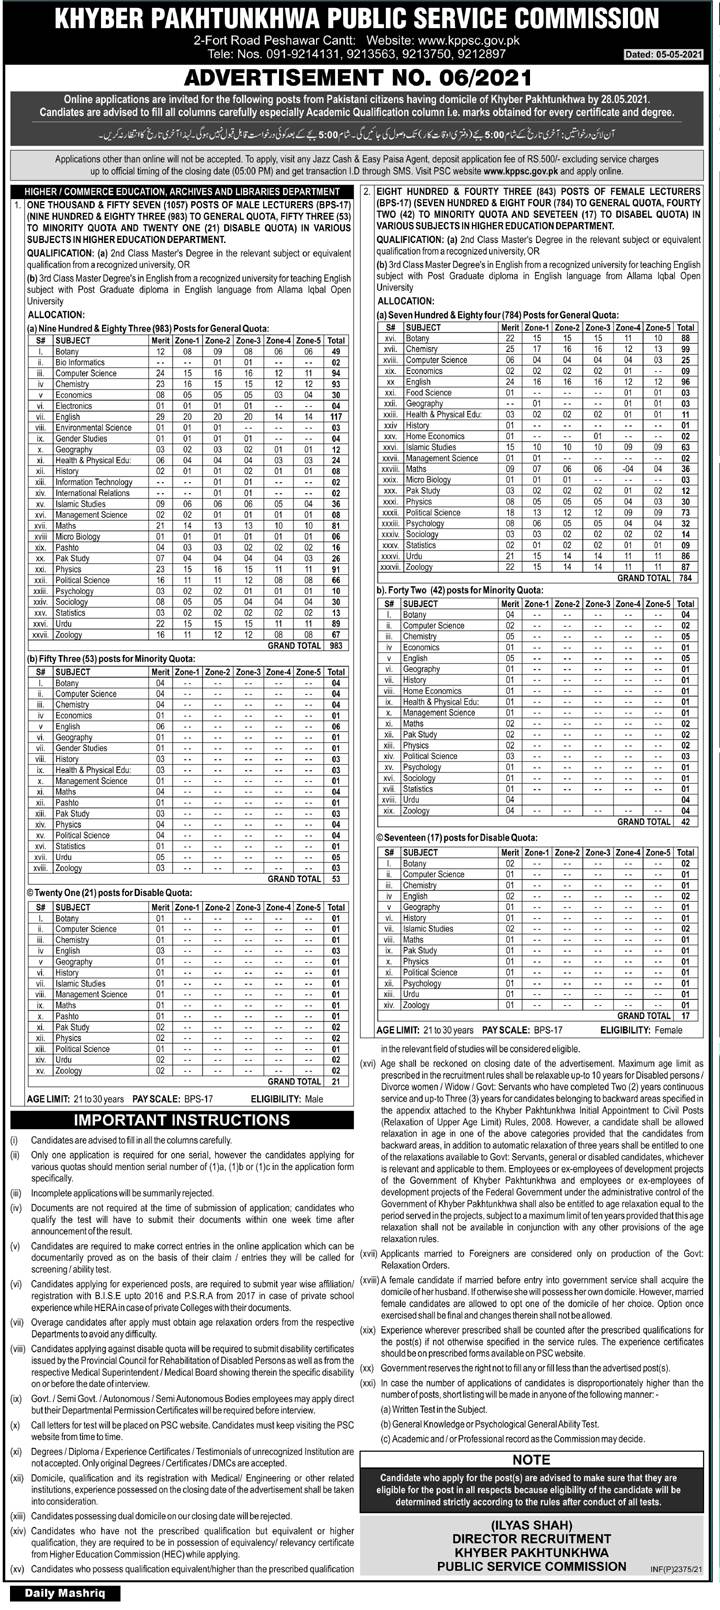 KPPSC Lecturer Jobs 2021 For Males & Females, Apply Online, Roll No, Result